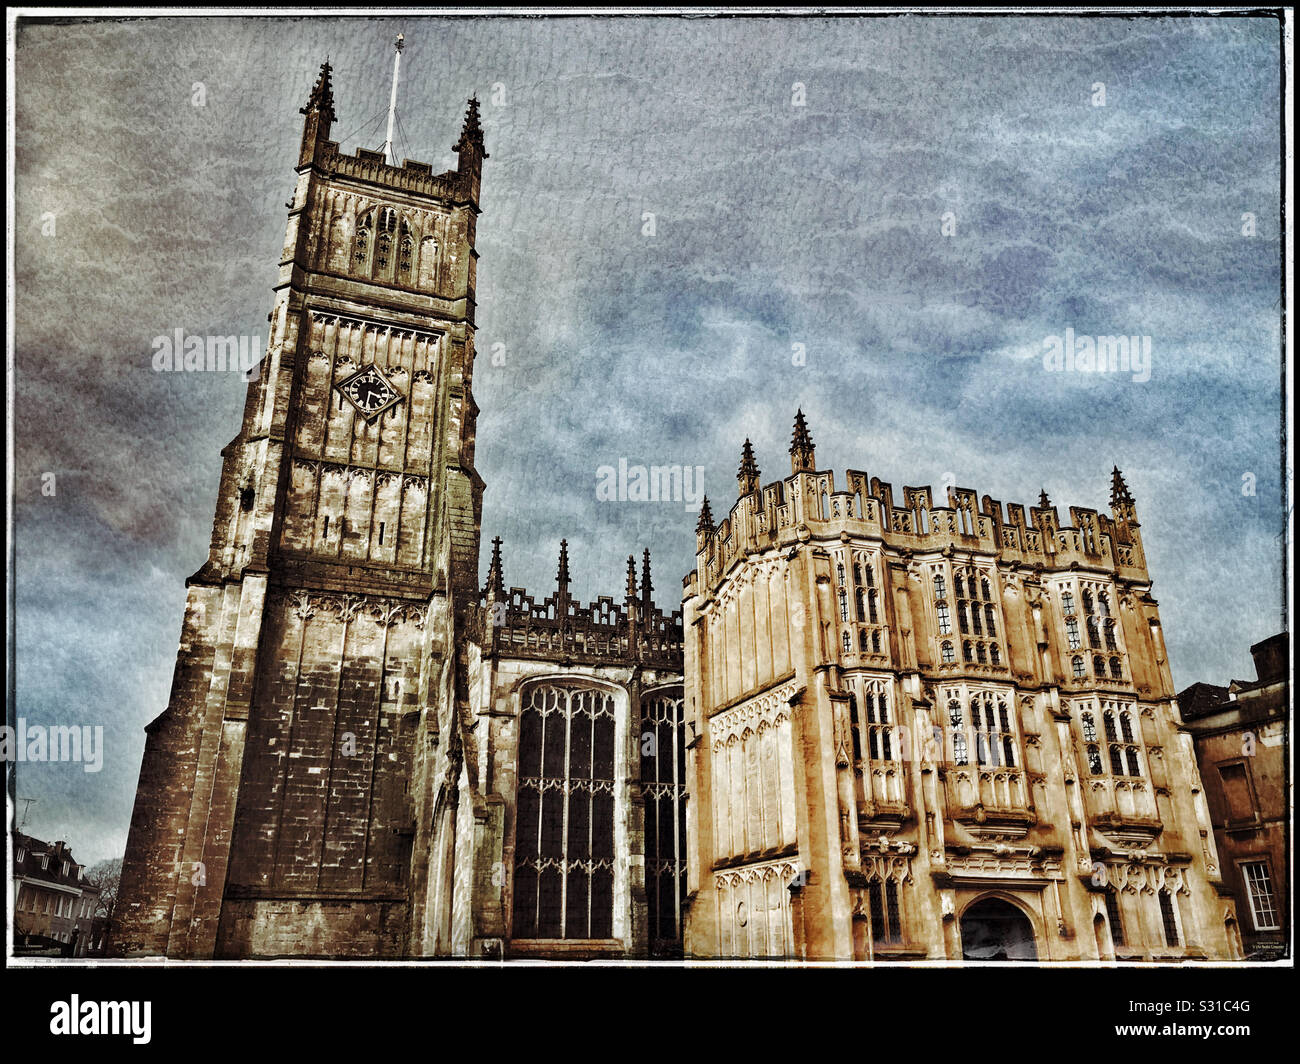 A retro view of the famous Anglican St. John Baptist Parish Church in Cirencester, Gloucestershire, England. A good starting point to explore the Cotswold region. Photo Credit - © COLIN HOSKINS. Stock Photo